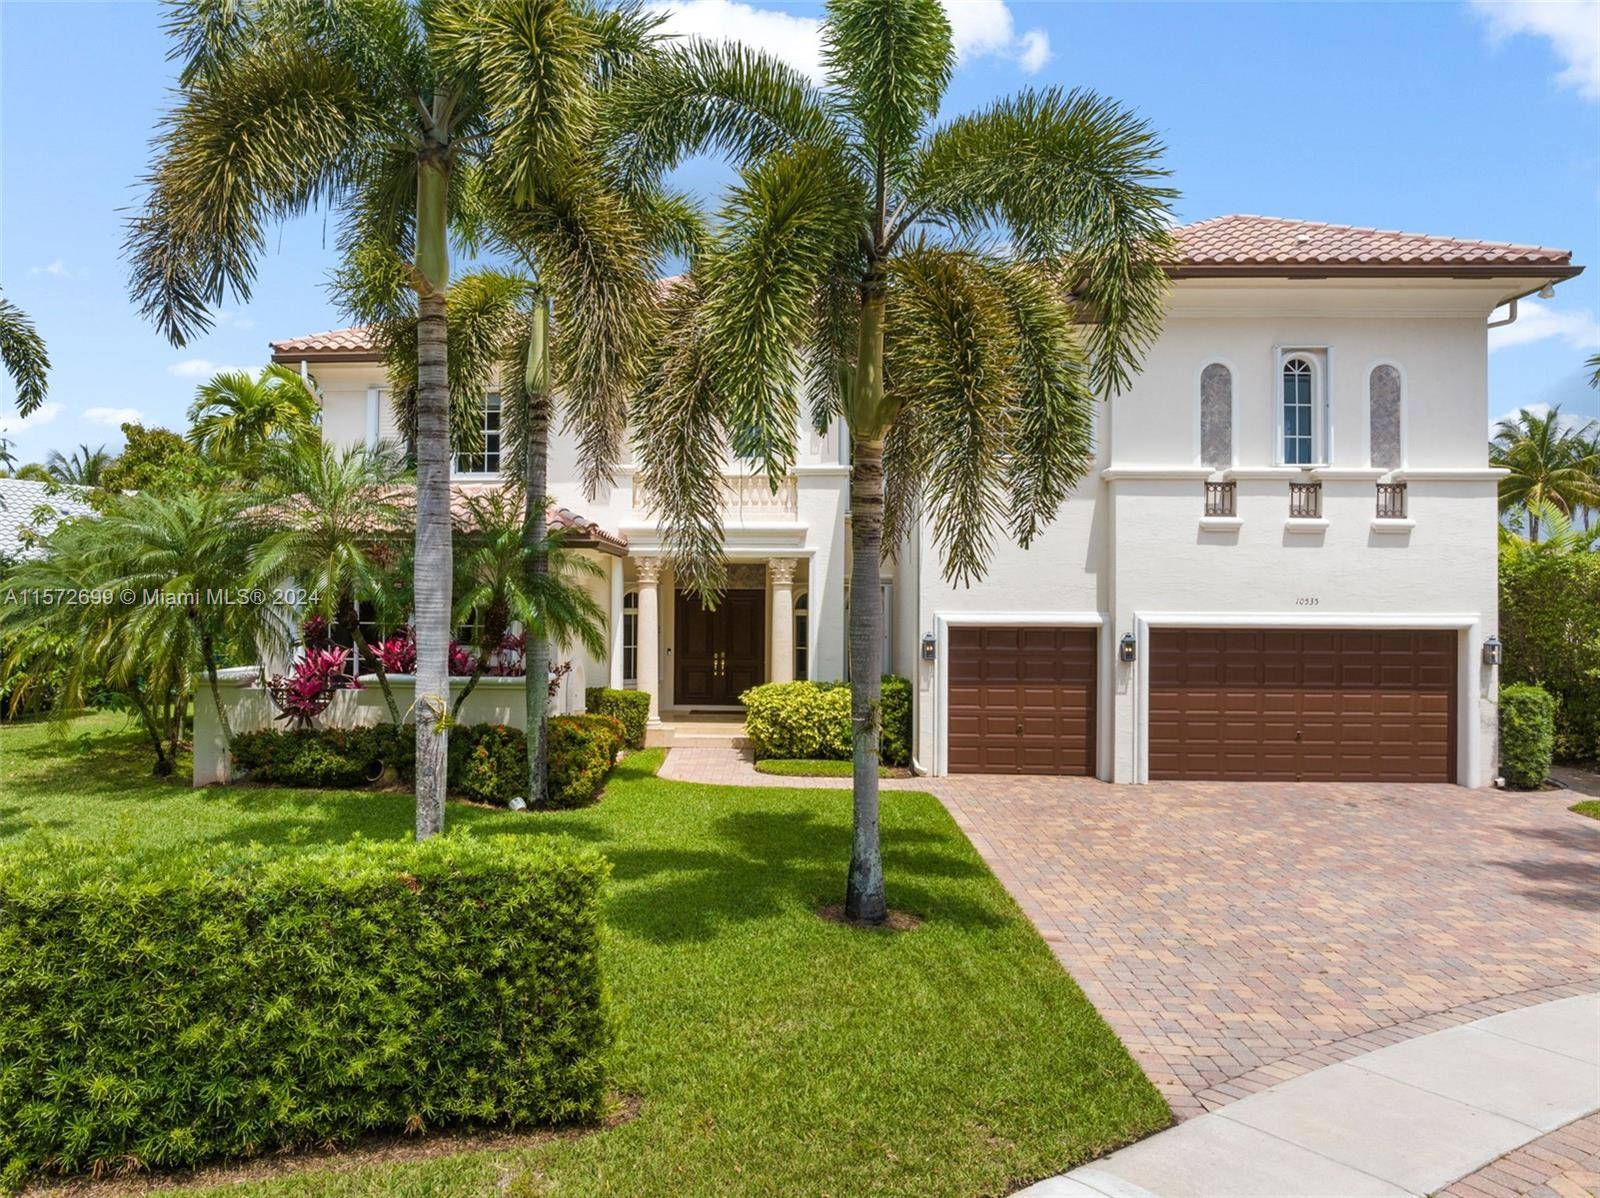 READY TO MOVE IN. Prestigious Hawks Landing community of Plantation, Florida, this stunning 6 bedroom, 7 1 bathroom estate offers a lifestyle of unparalleled luxury and comfort.